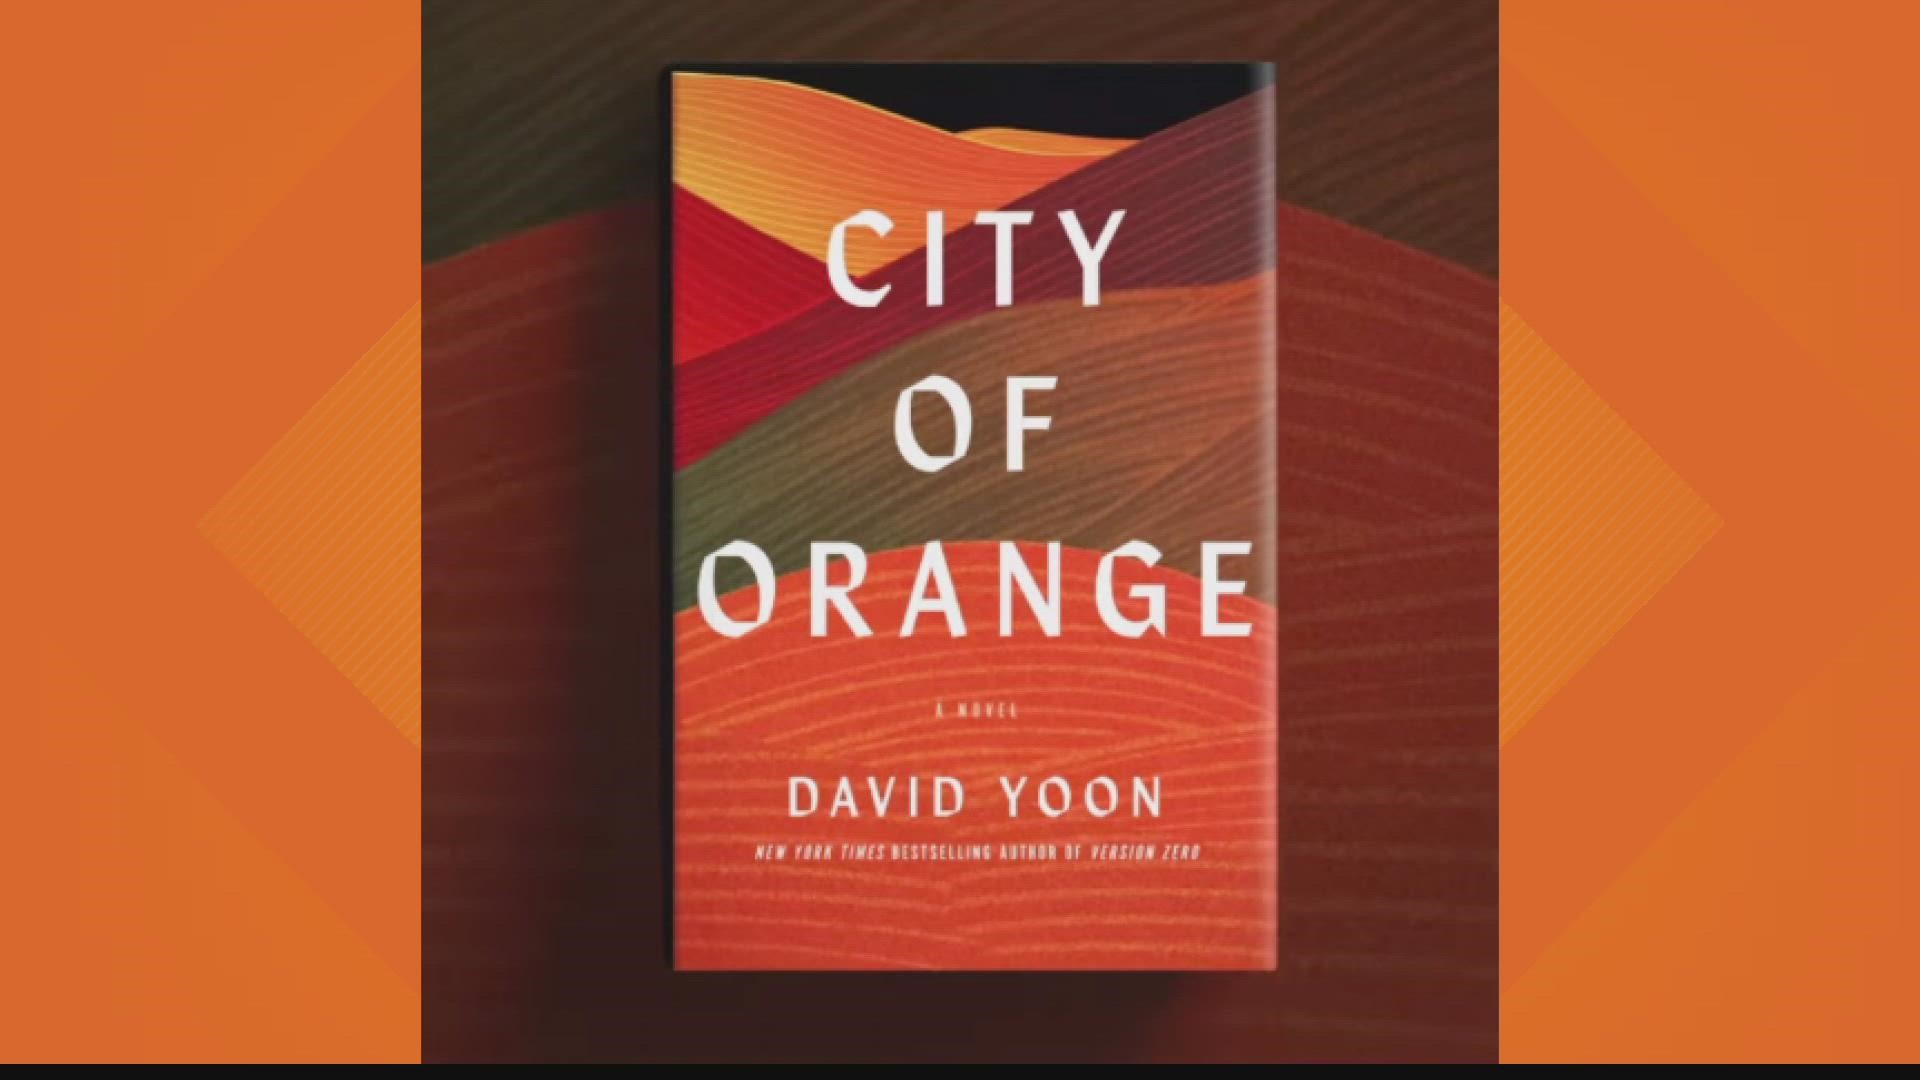 New York Times Best-selling author David Yoon is coming to St. Louis thanks to the St. Louis County Library District and The May Book Project